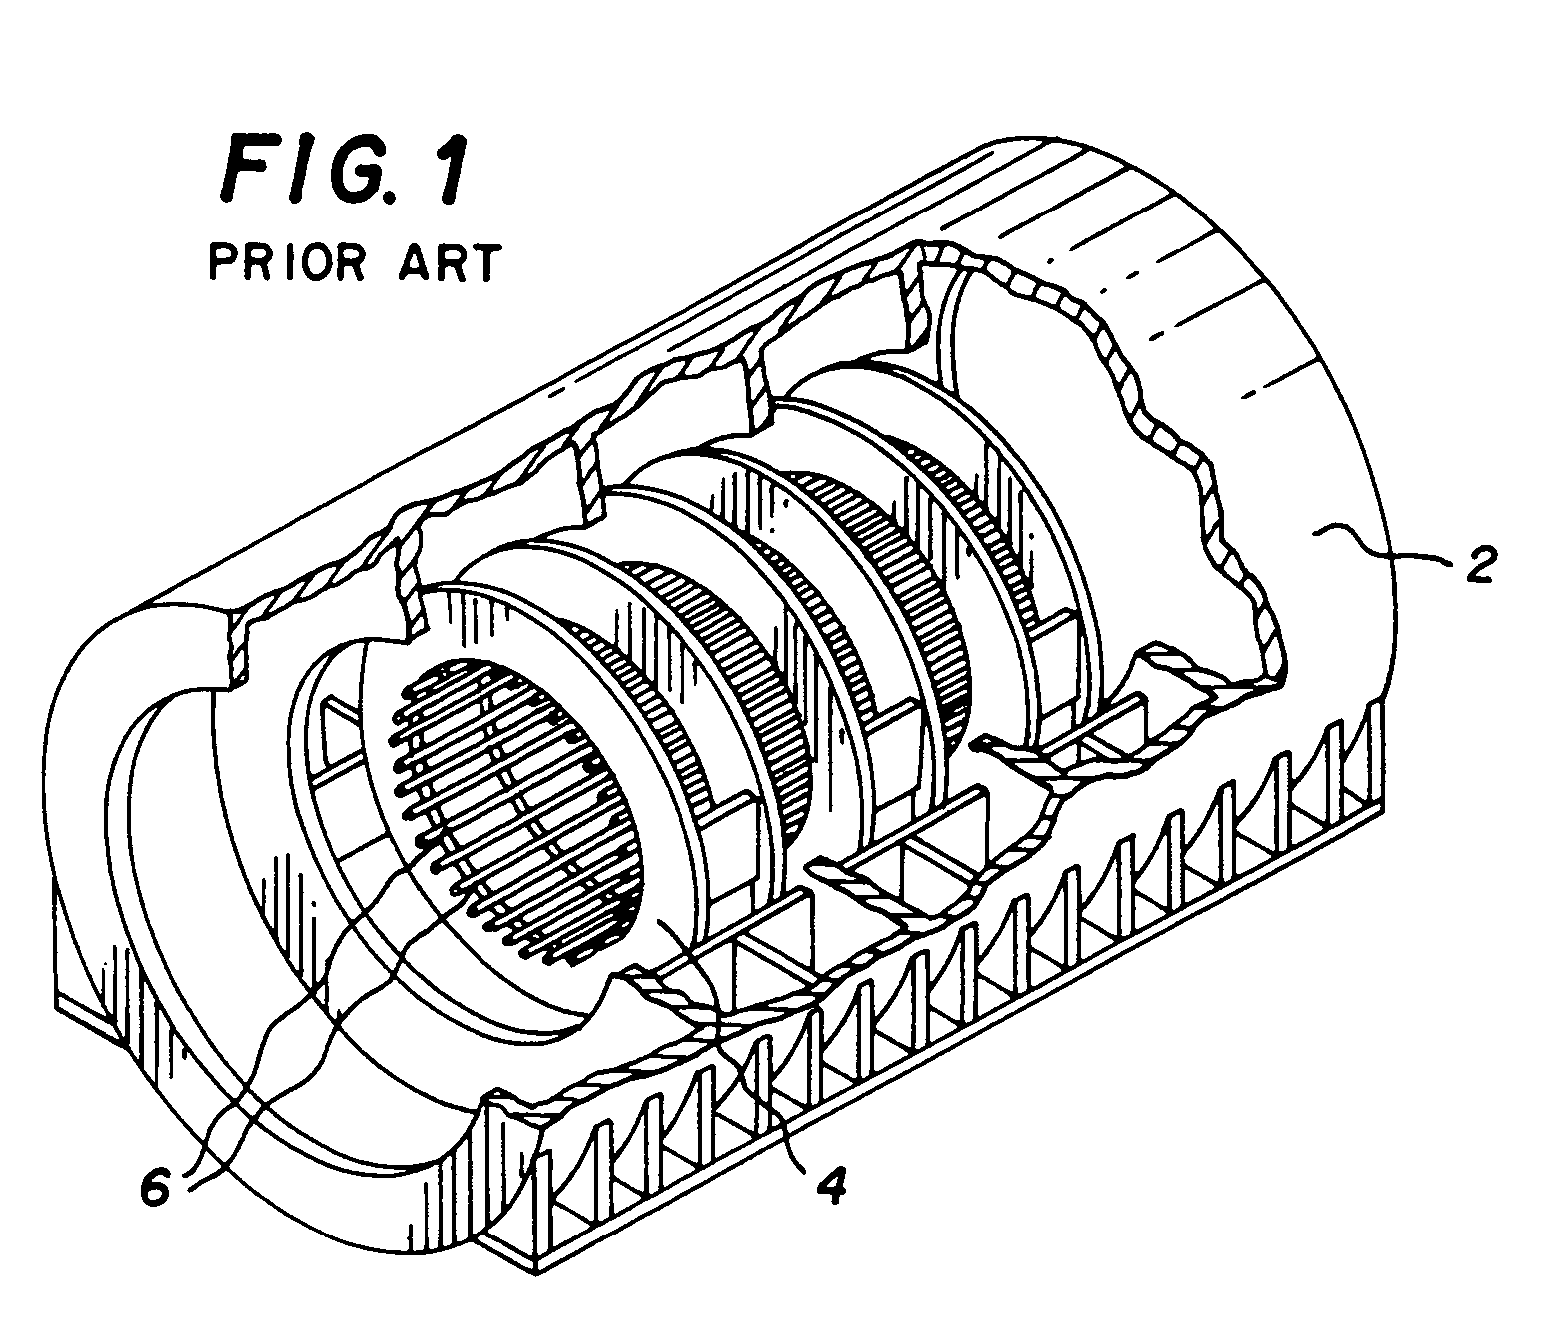 Method of horizontally stacking a stator core within a stator frame